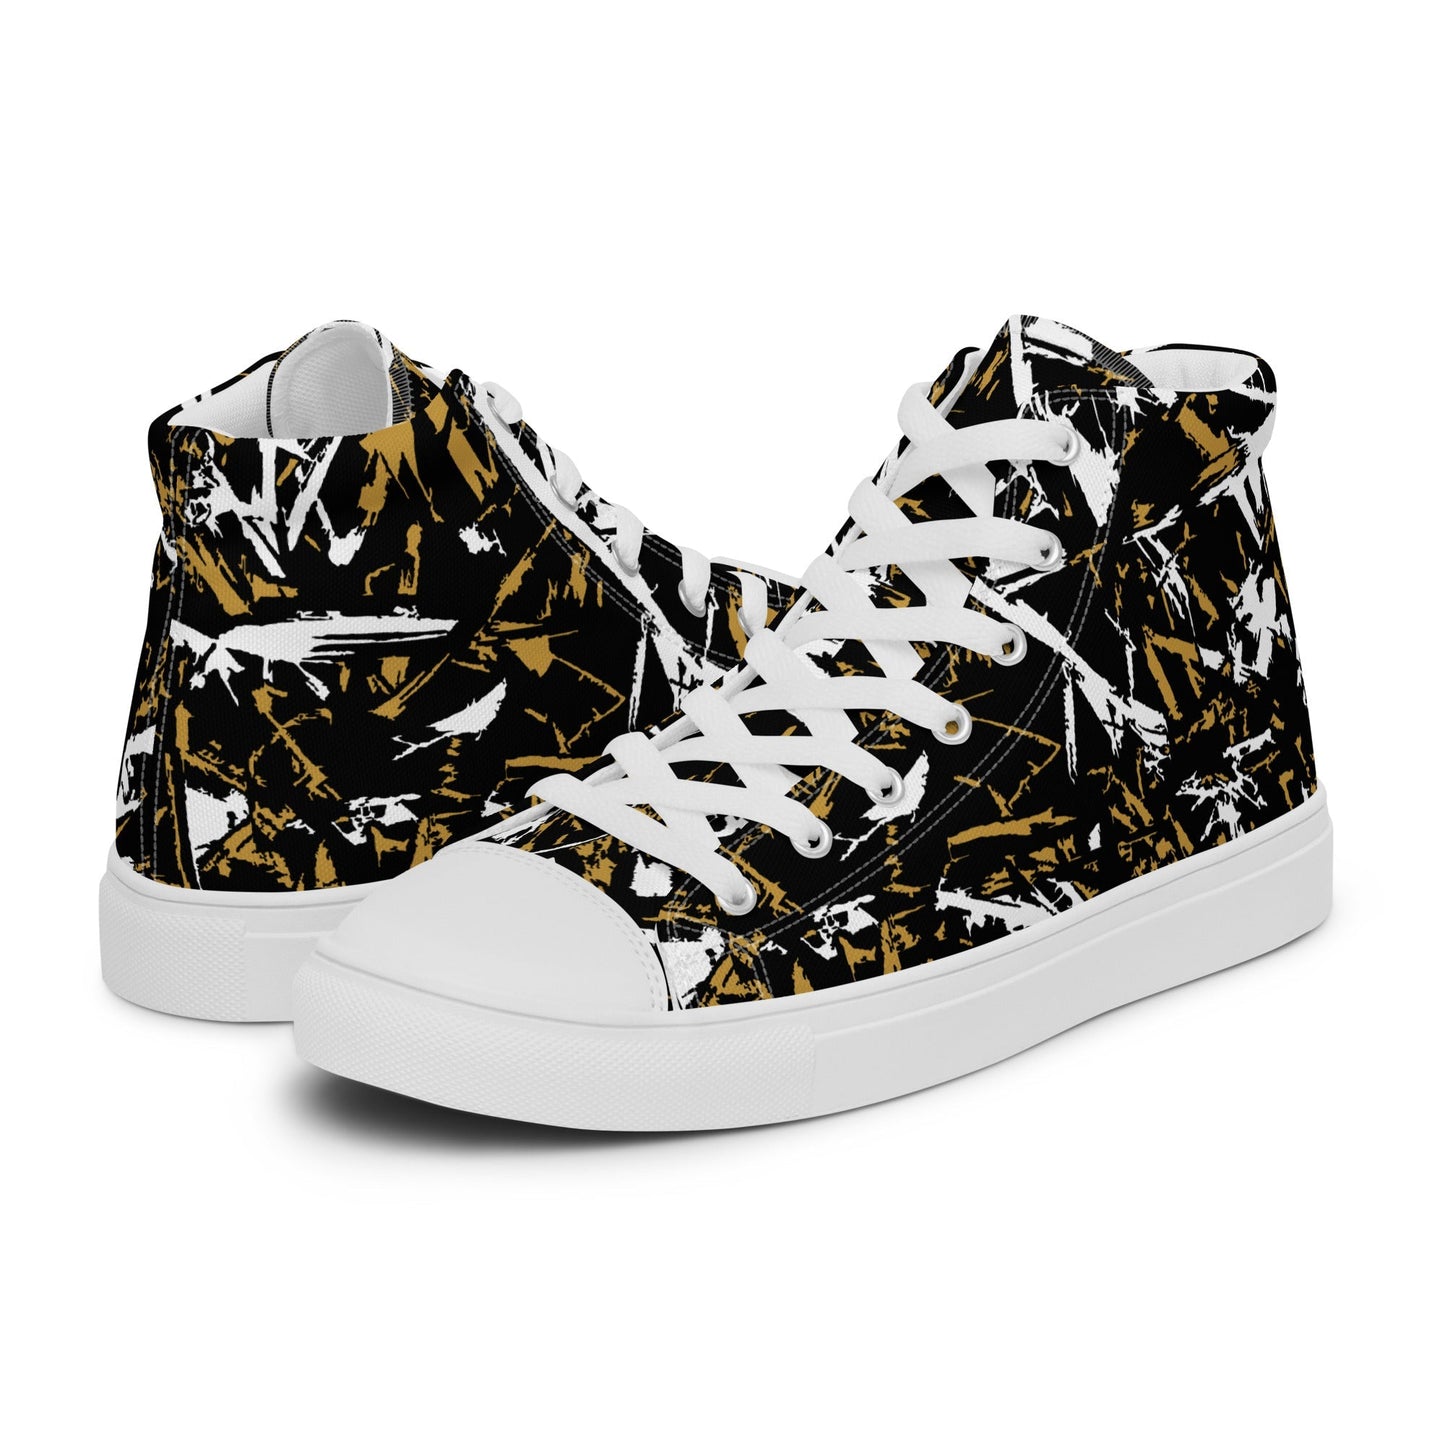 Men’s Forest Sneakers-DoggyLoveandMore